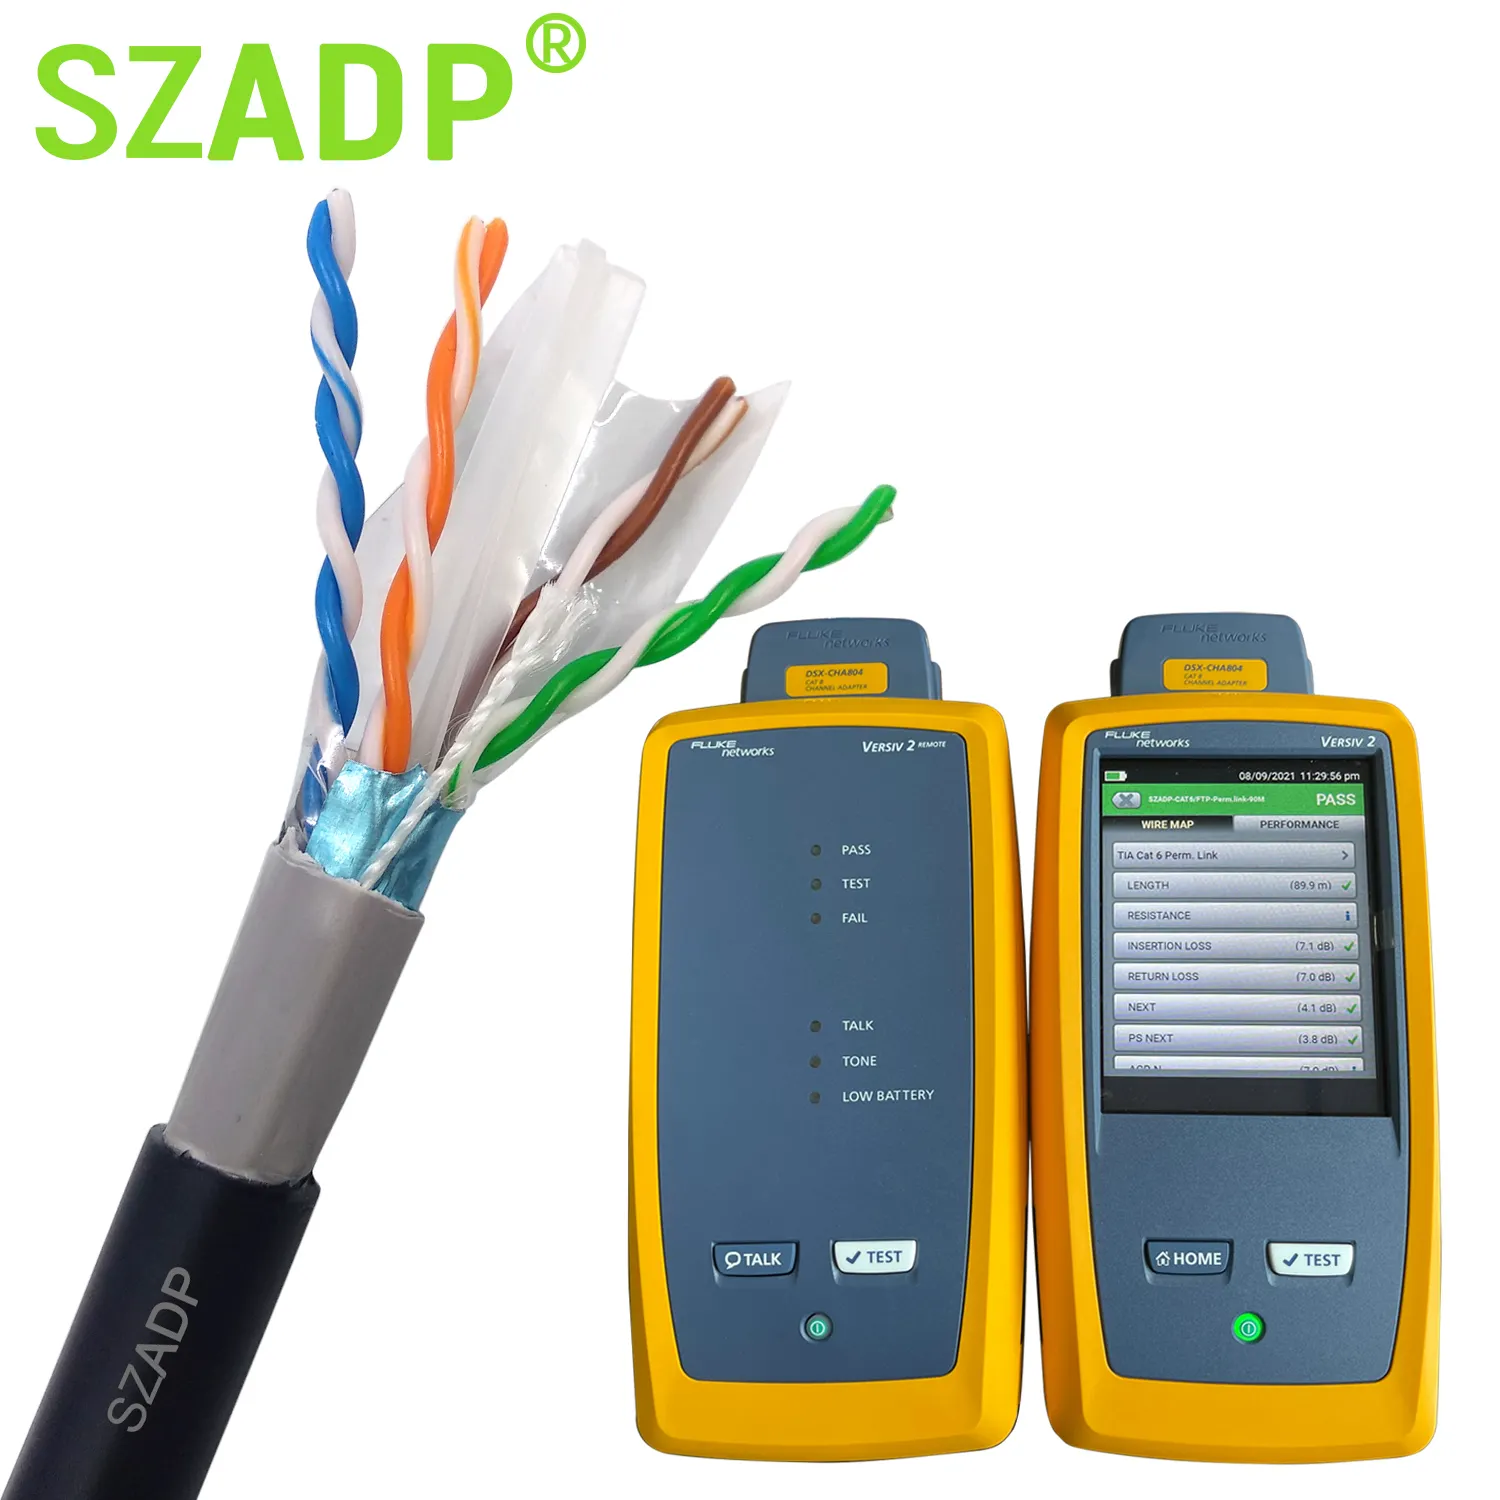 Network Cable Szadp Network Cable FTP CAT6 High Speed 500MHZ Lan Cable